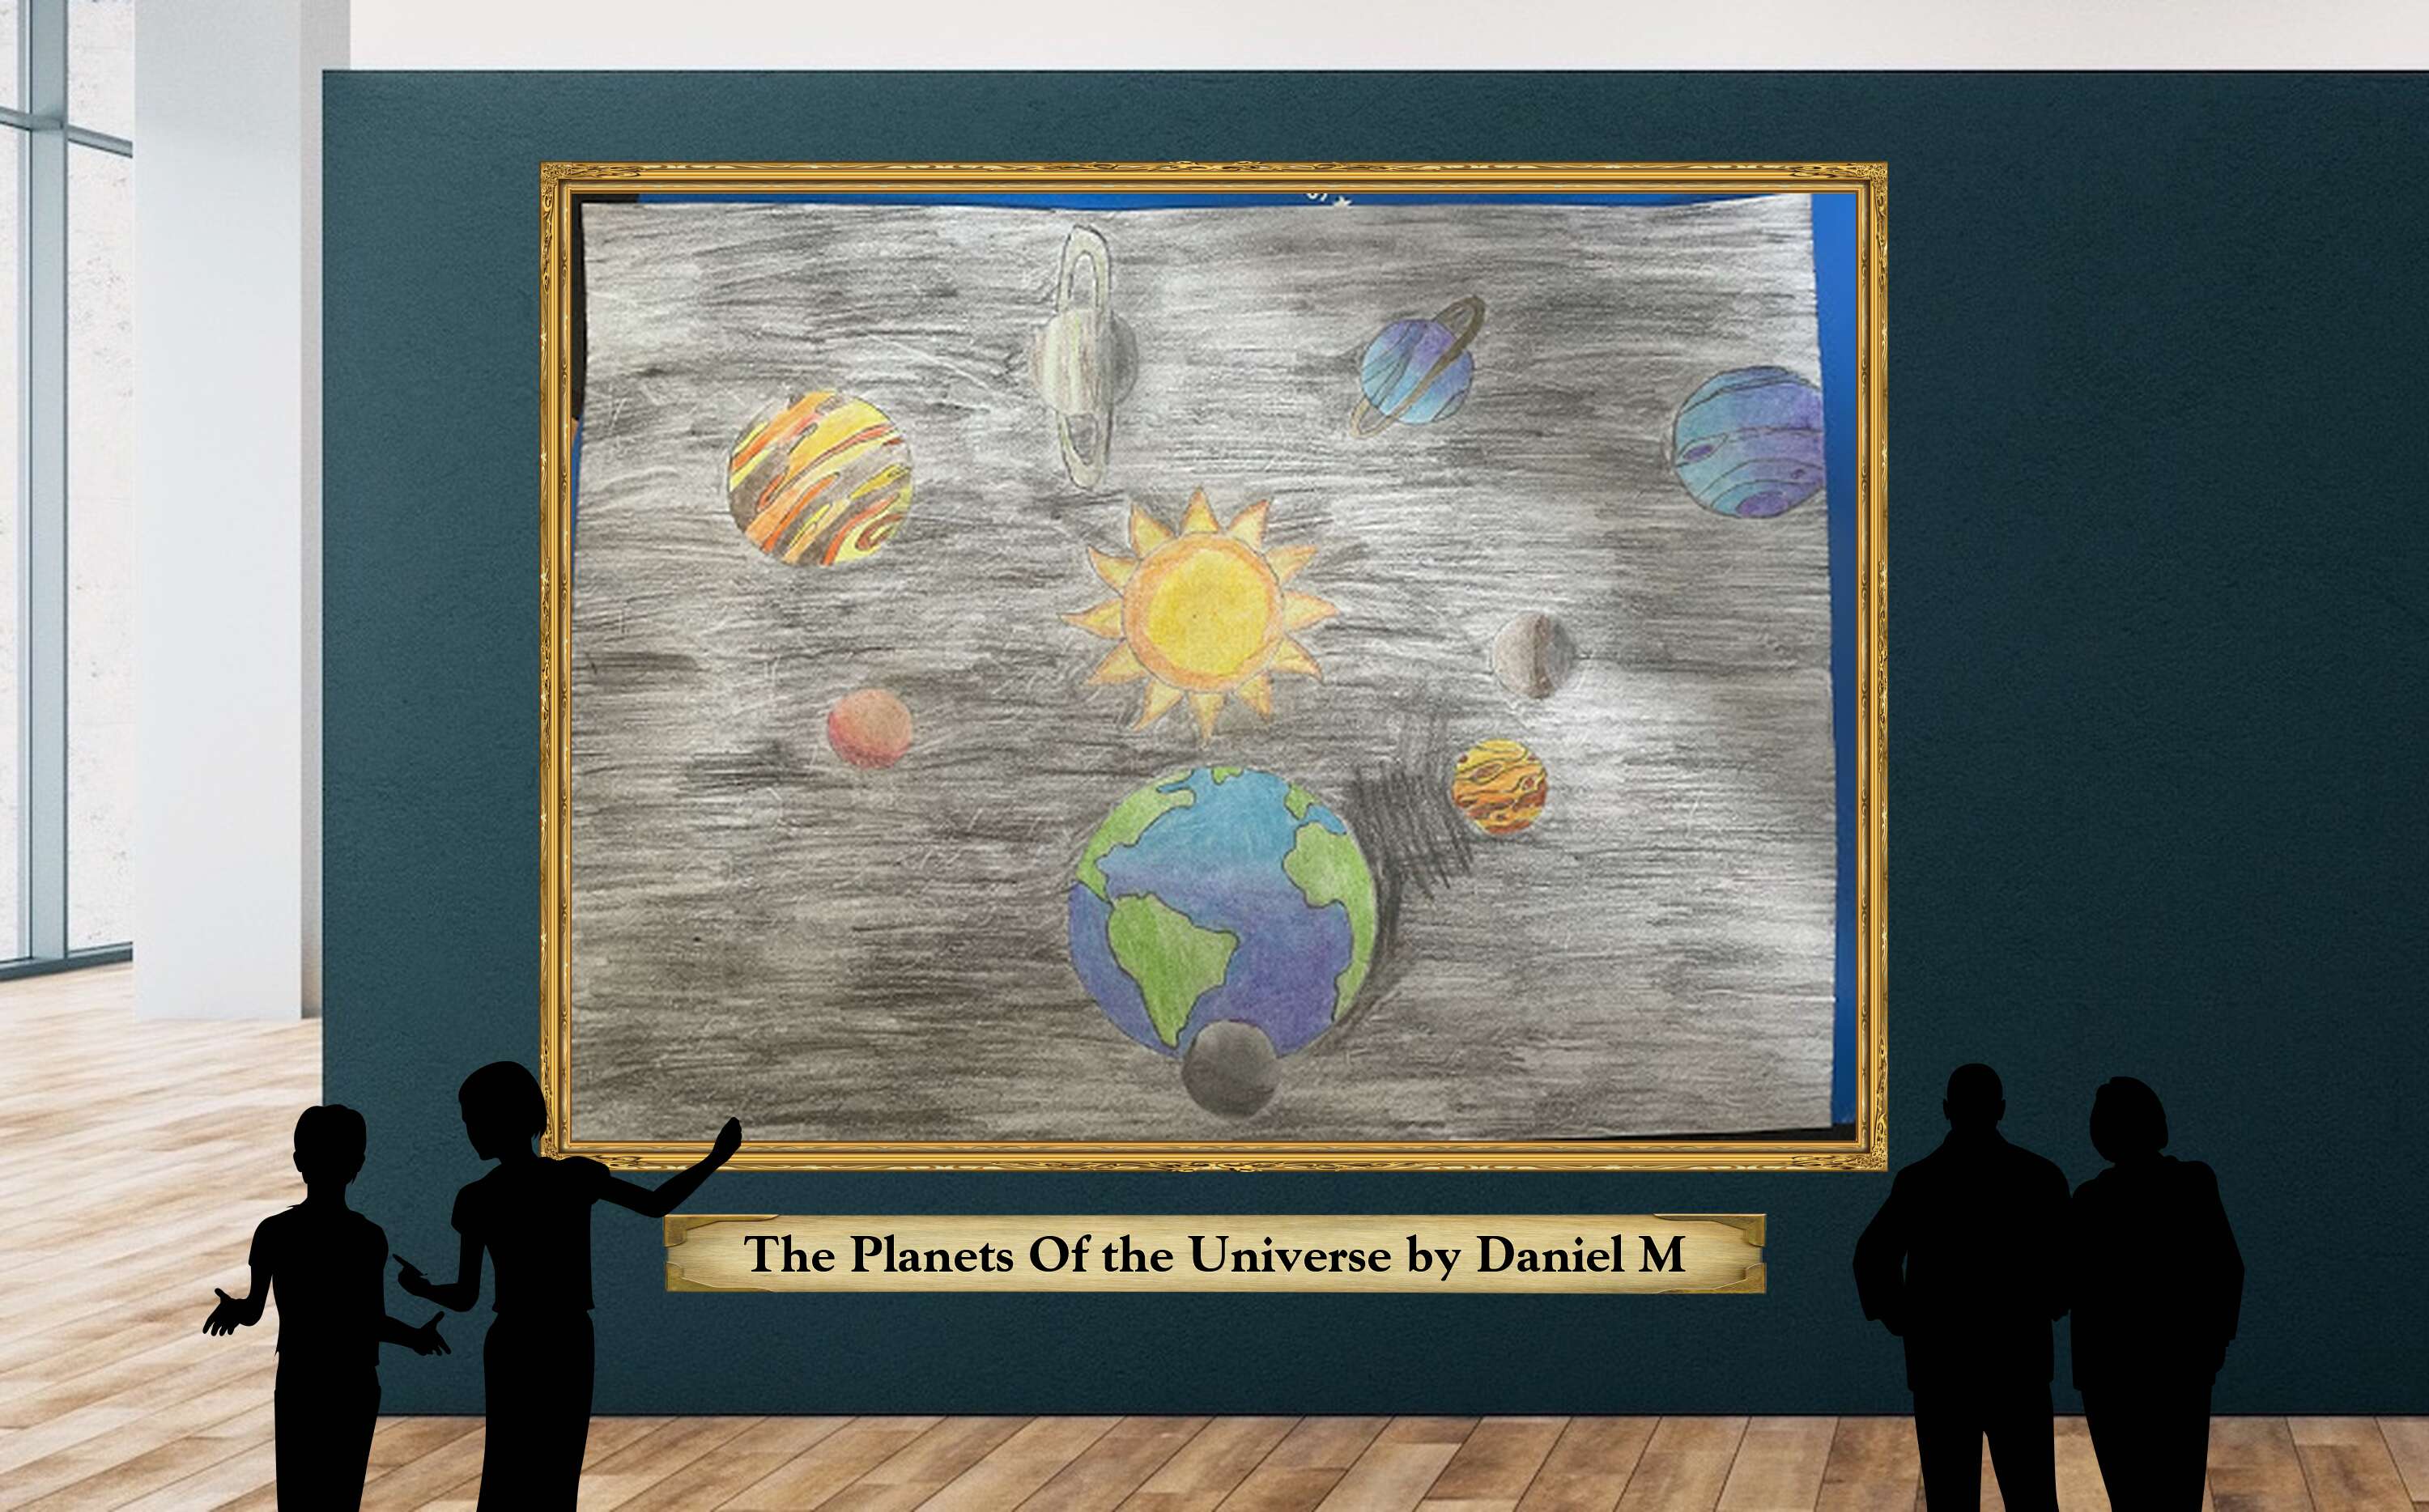 The Planets Of the Universe by Daniel M